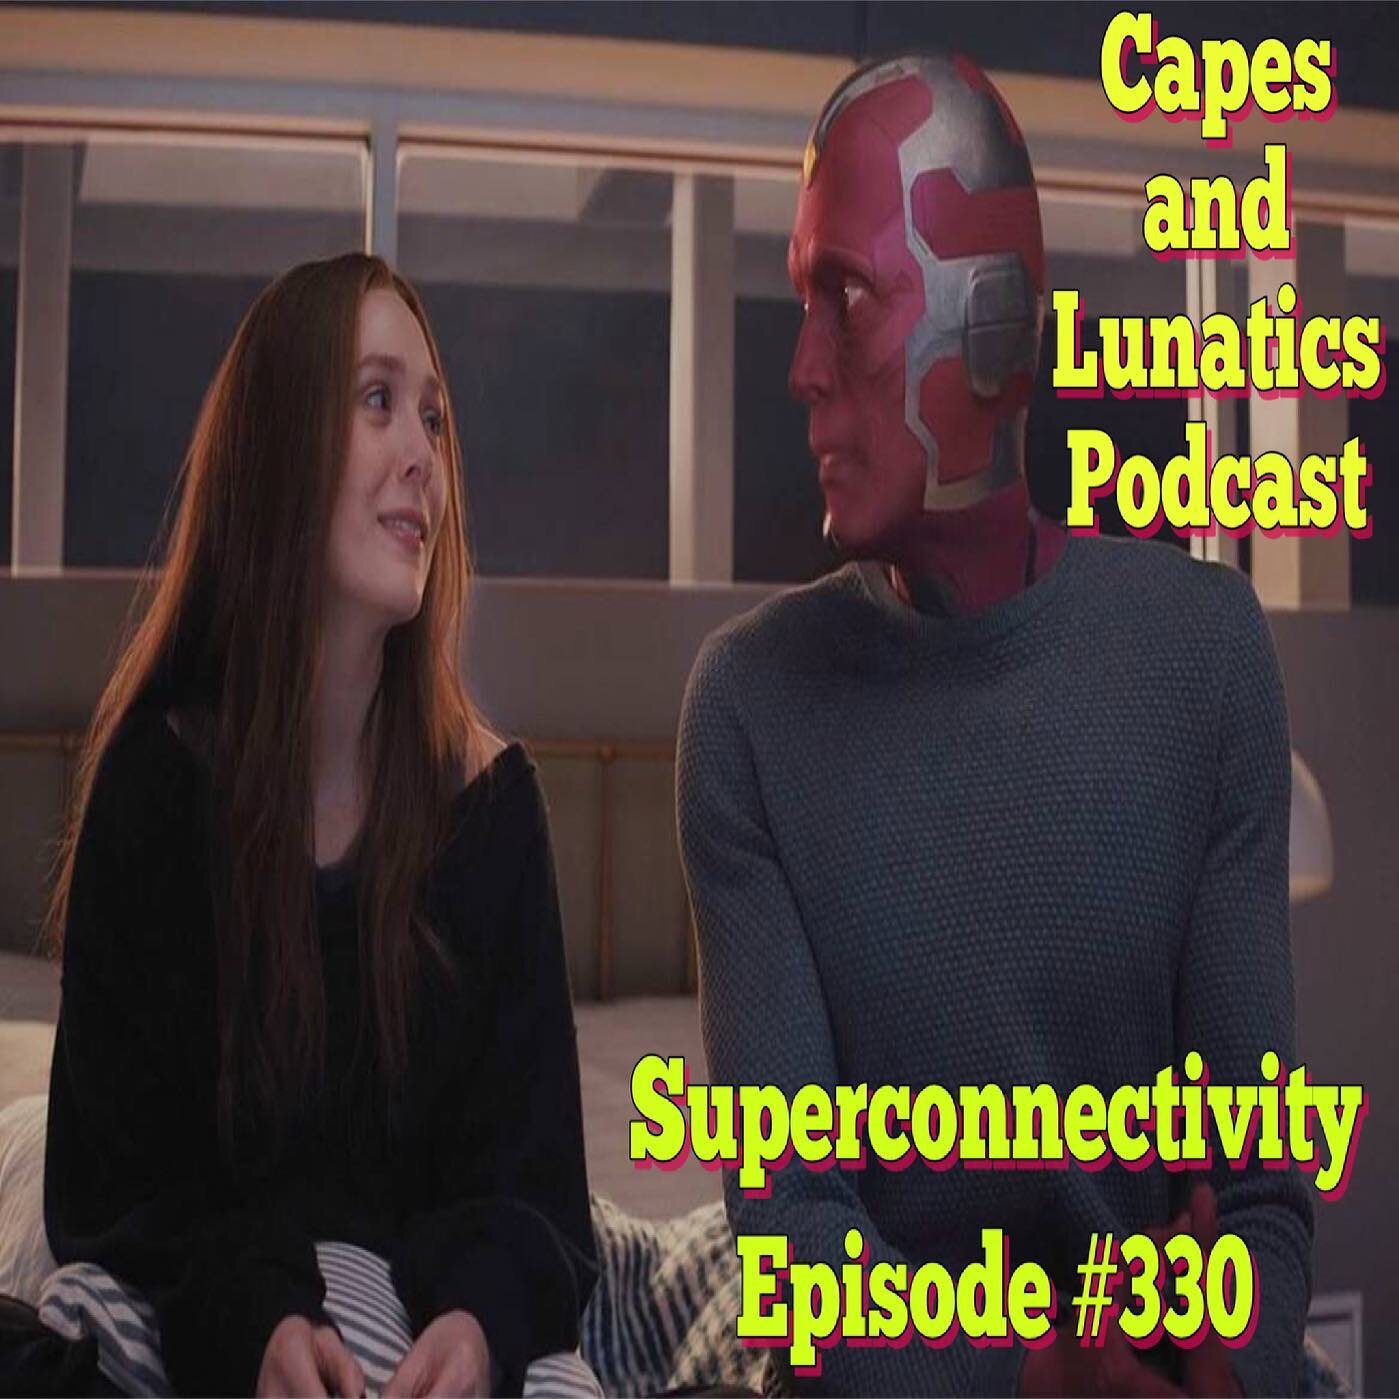 Superconnectivity #podcast episode #330! @superconnectivity and @nightwingpdp discuss #wandavision and new Comics including #usagent #maestrowarandpax #blackcat #theunion and much MORE! Check it out on our #youtubechannel or anywhere you download pod